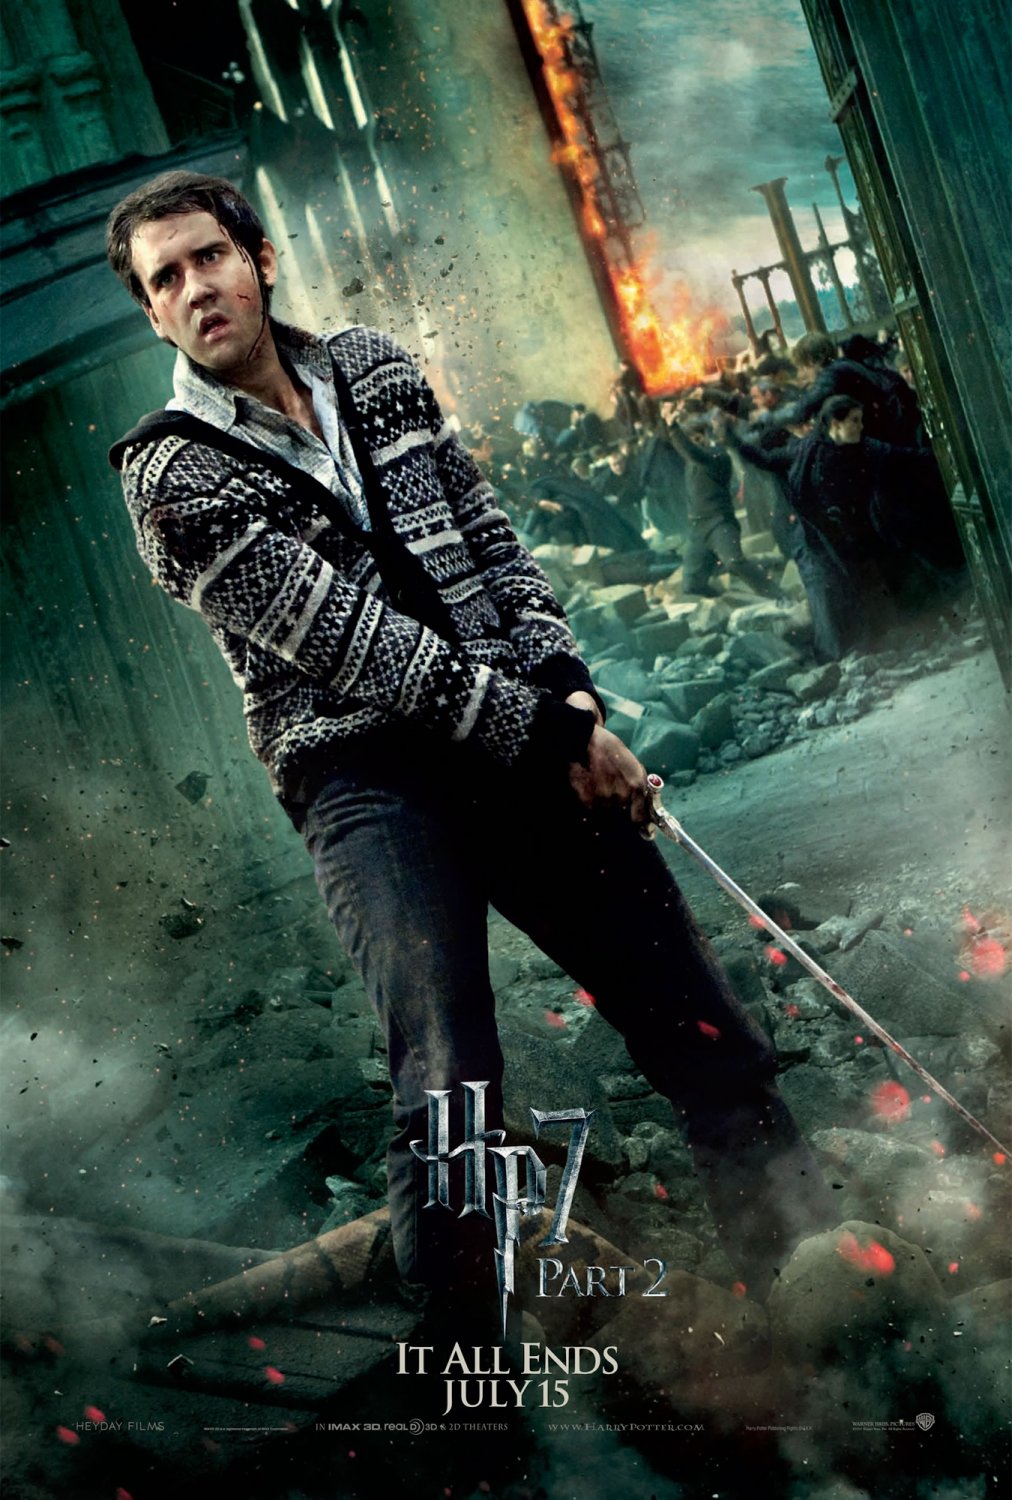 Harry potter and the deathly hallows part 2 poster hd Harry Potter And The Deathly Hallows Part 2 Movie Poster 16 Of 28 Imp Awards